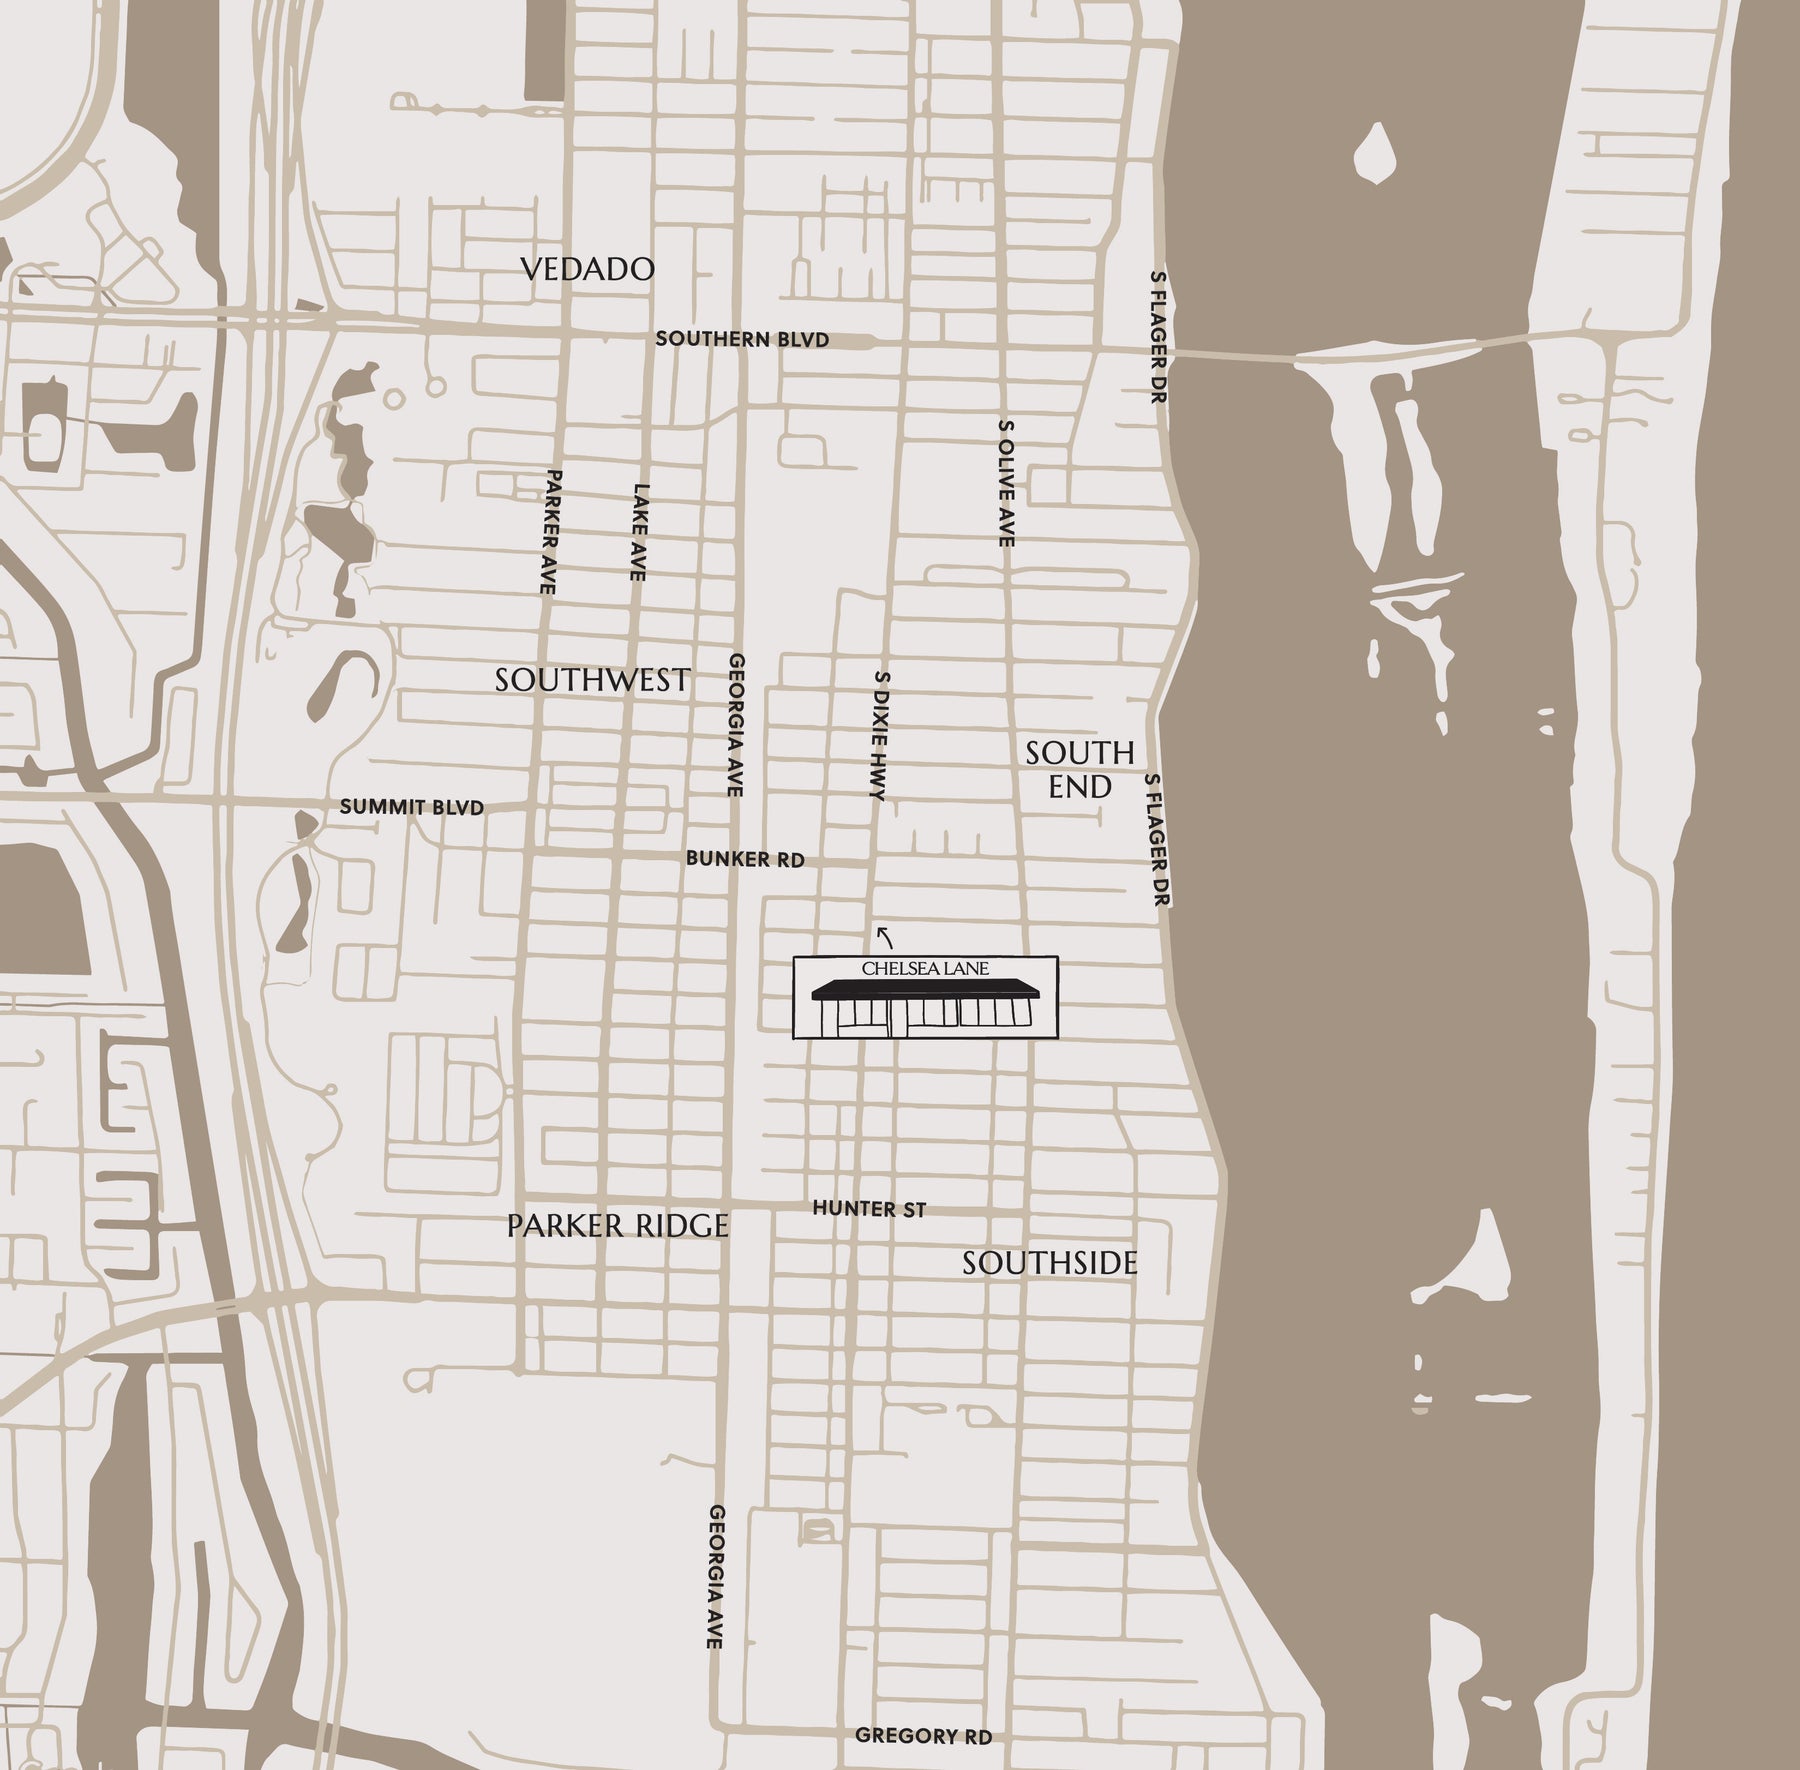 Picture of a map showing Dixie Highway pinpointing the Chelsea Lane Co. Showroom 